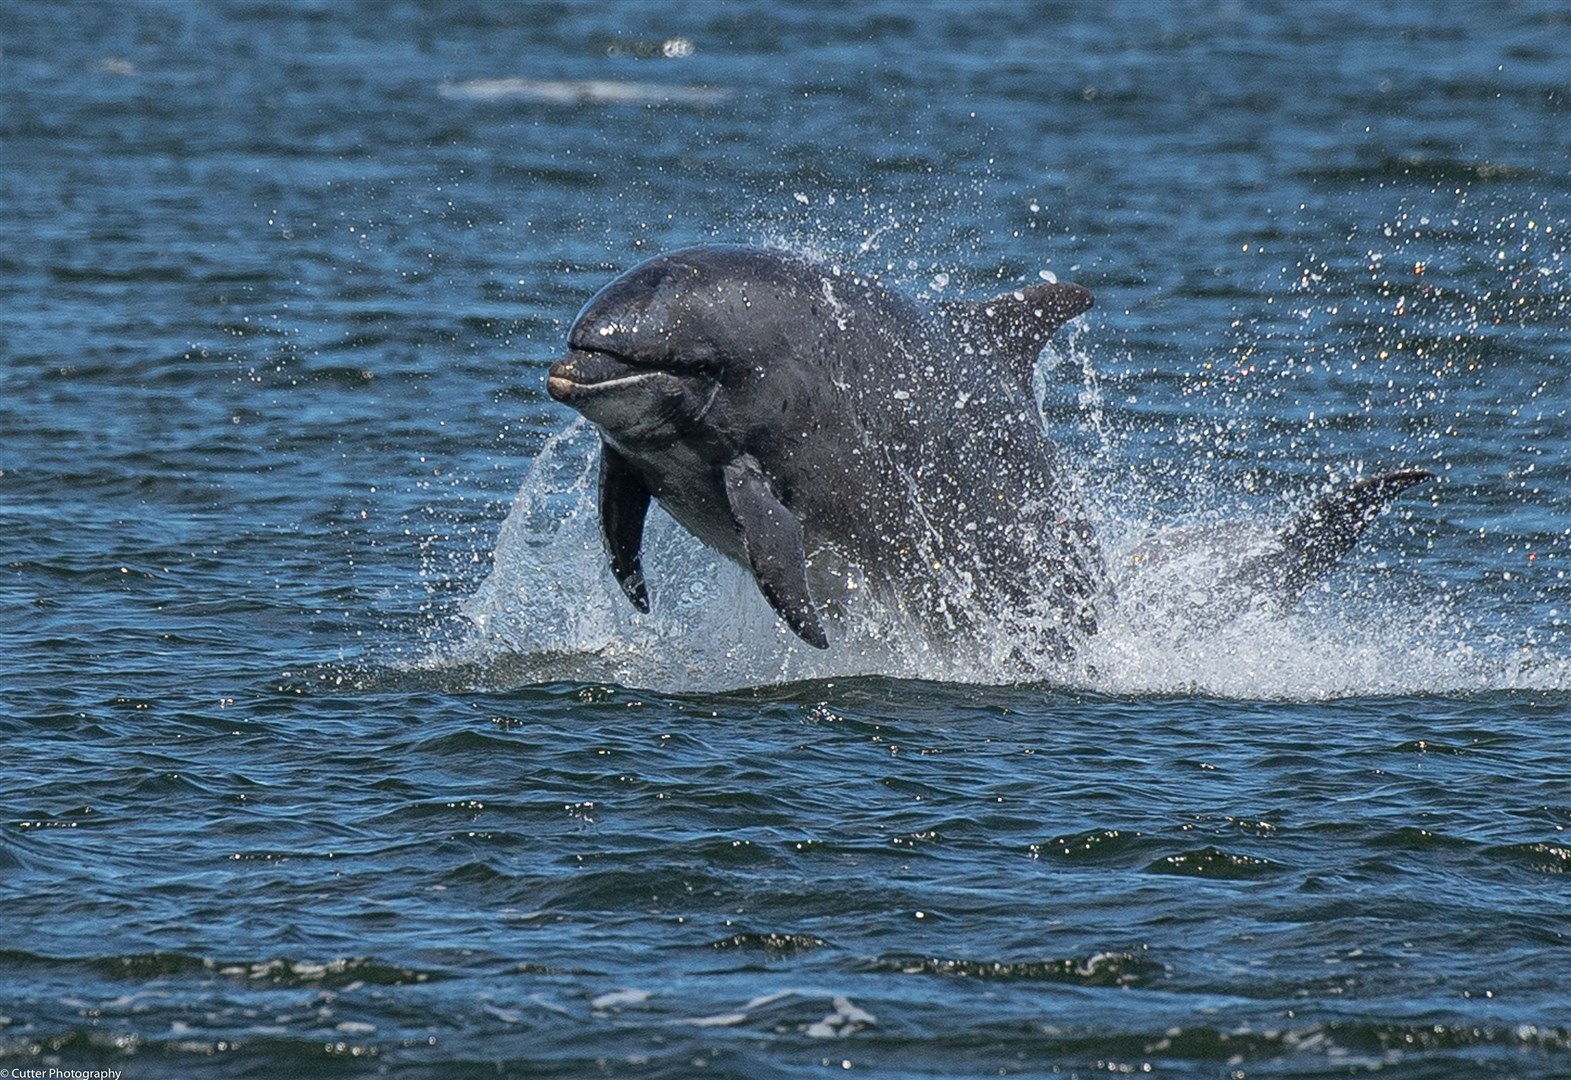 Scotland's first dolphin and porpoise conservation strategy launched